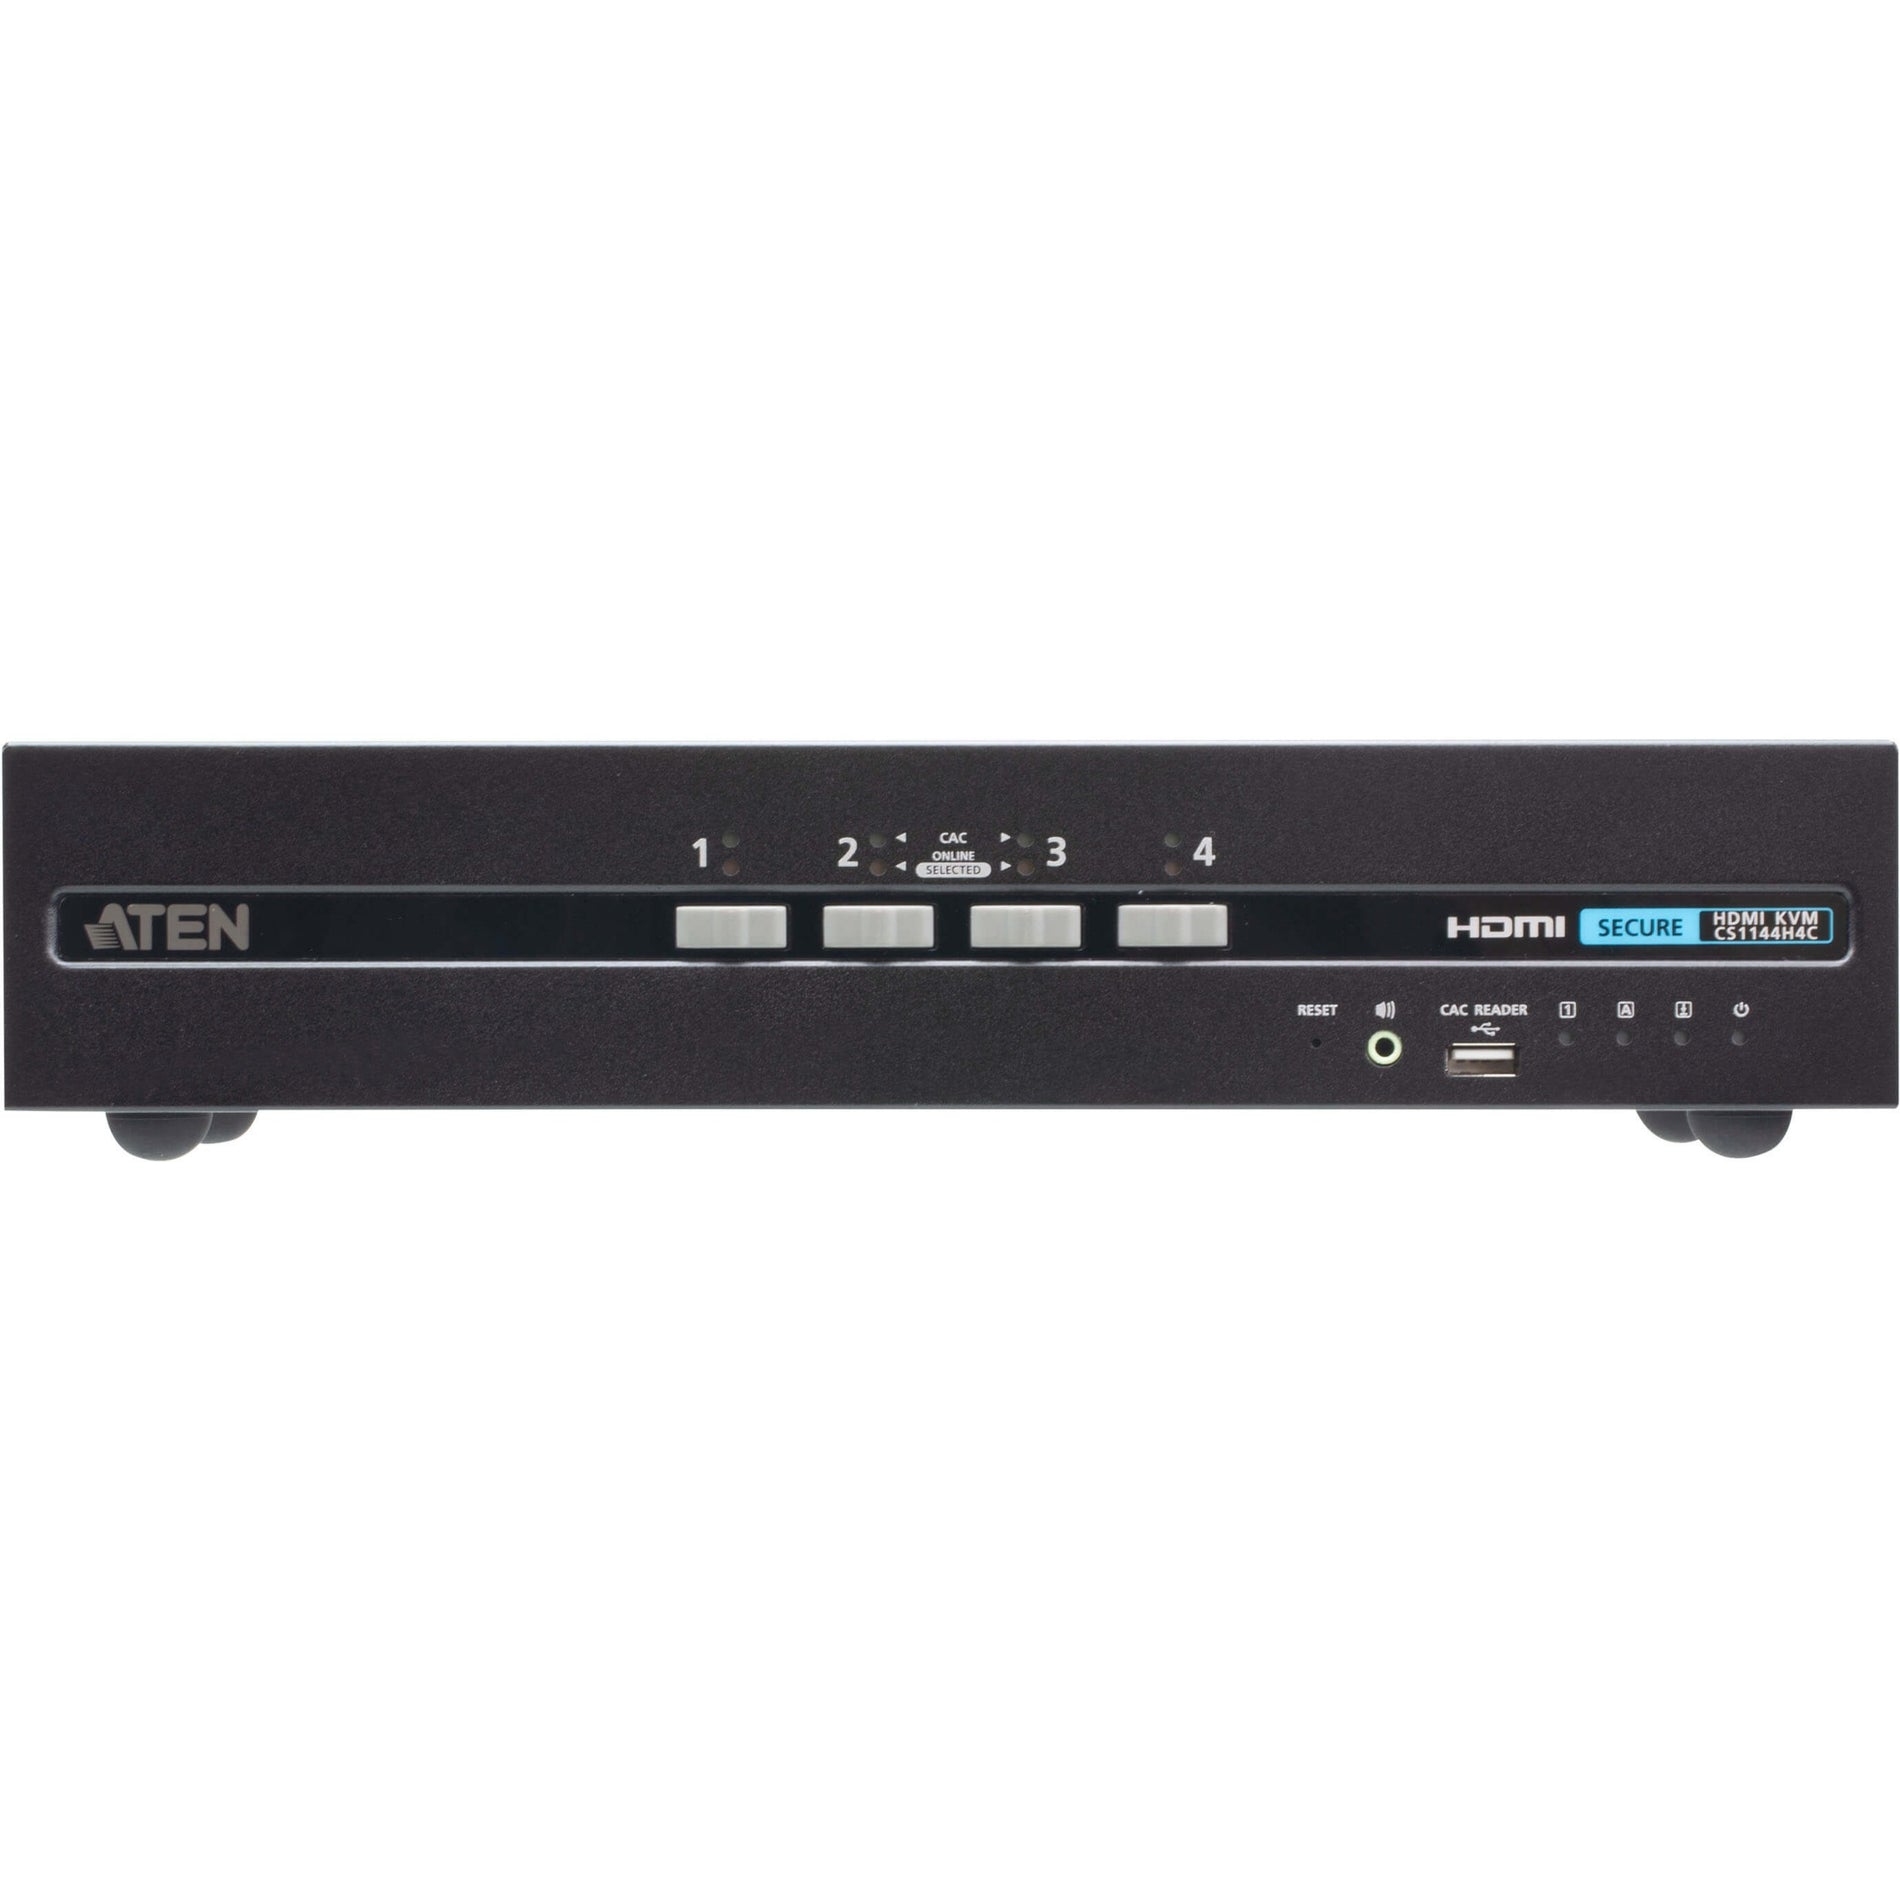 ATEN CS1144H4C 4-Port USB HDMI Dual Display Secure KVM Switch with CAC (PSD PP v4.0 Compliant)